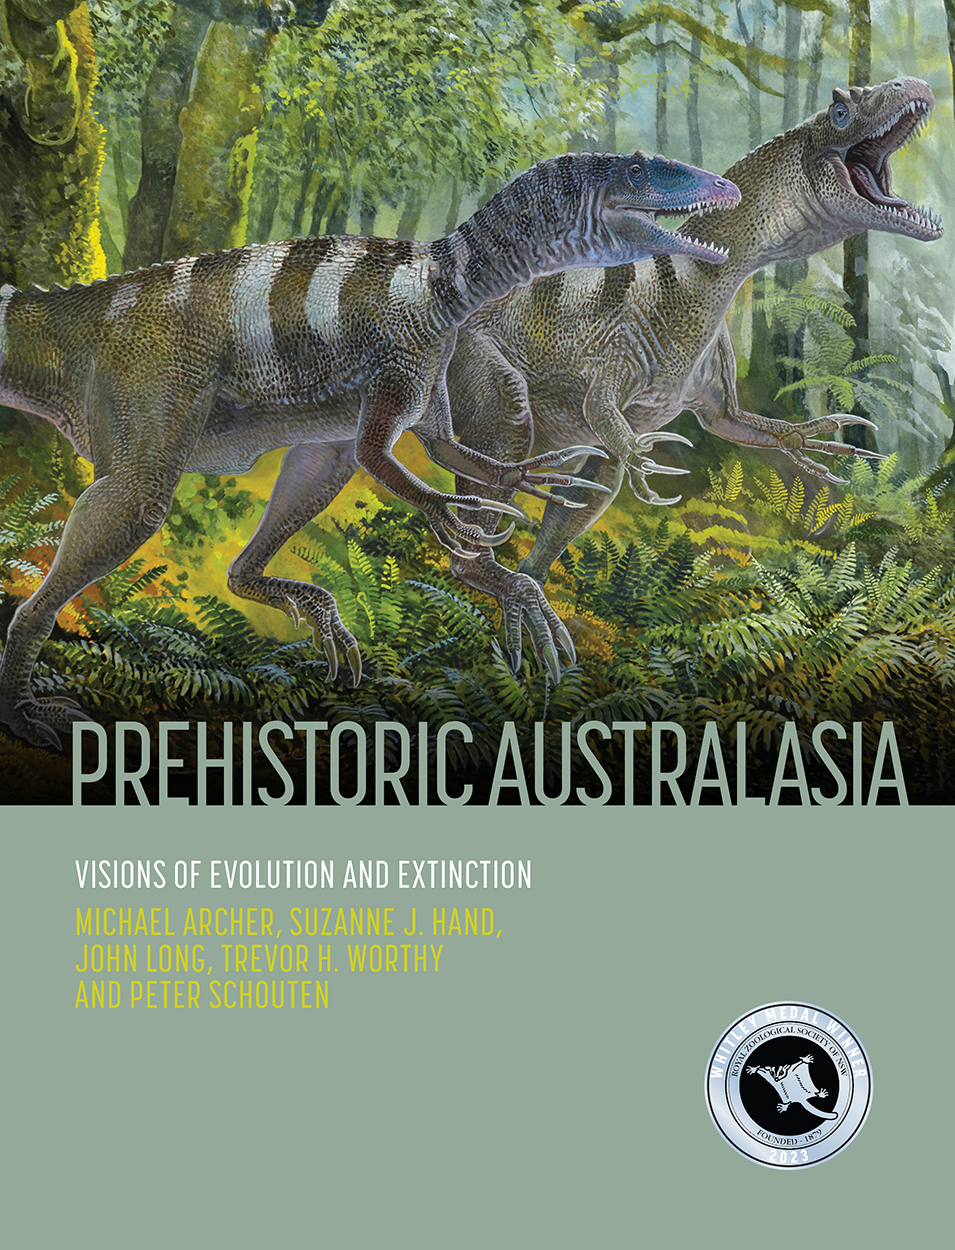 Cover of 'Prehistoric Australasia', featuring a painting of two predatory theropods running through rainforest.